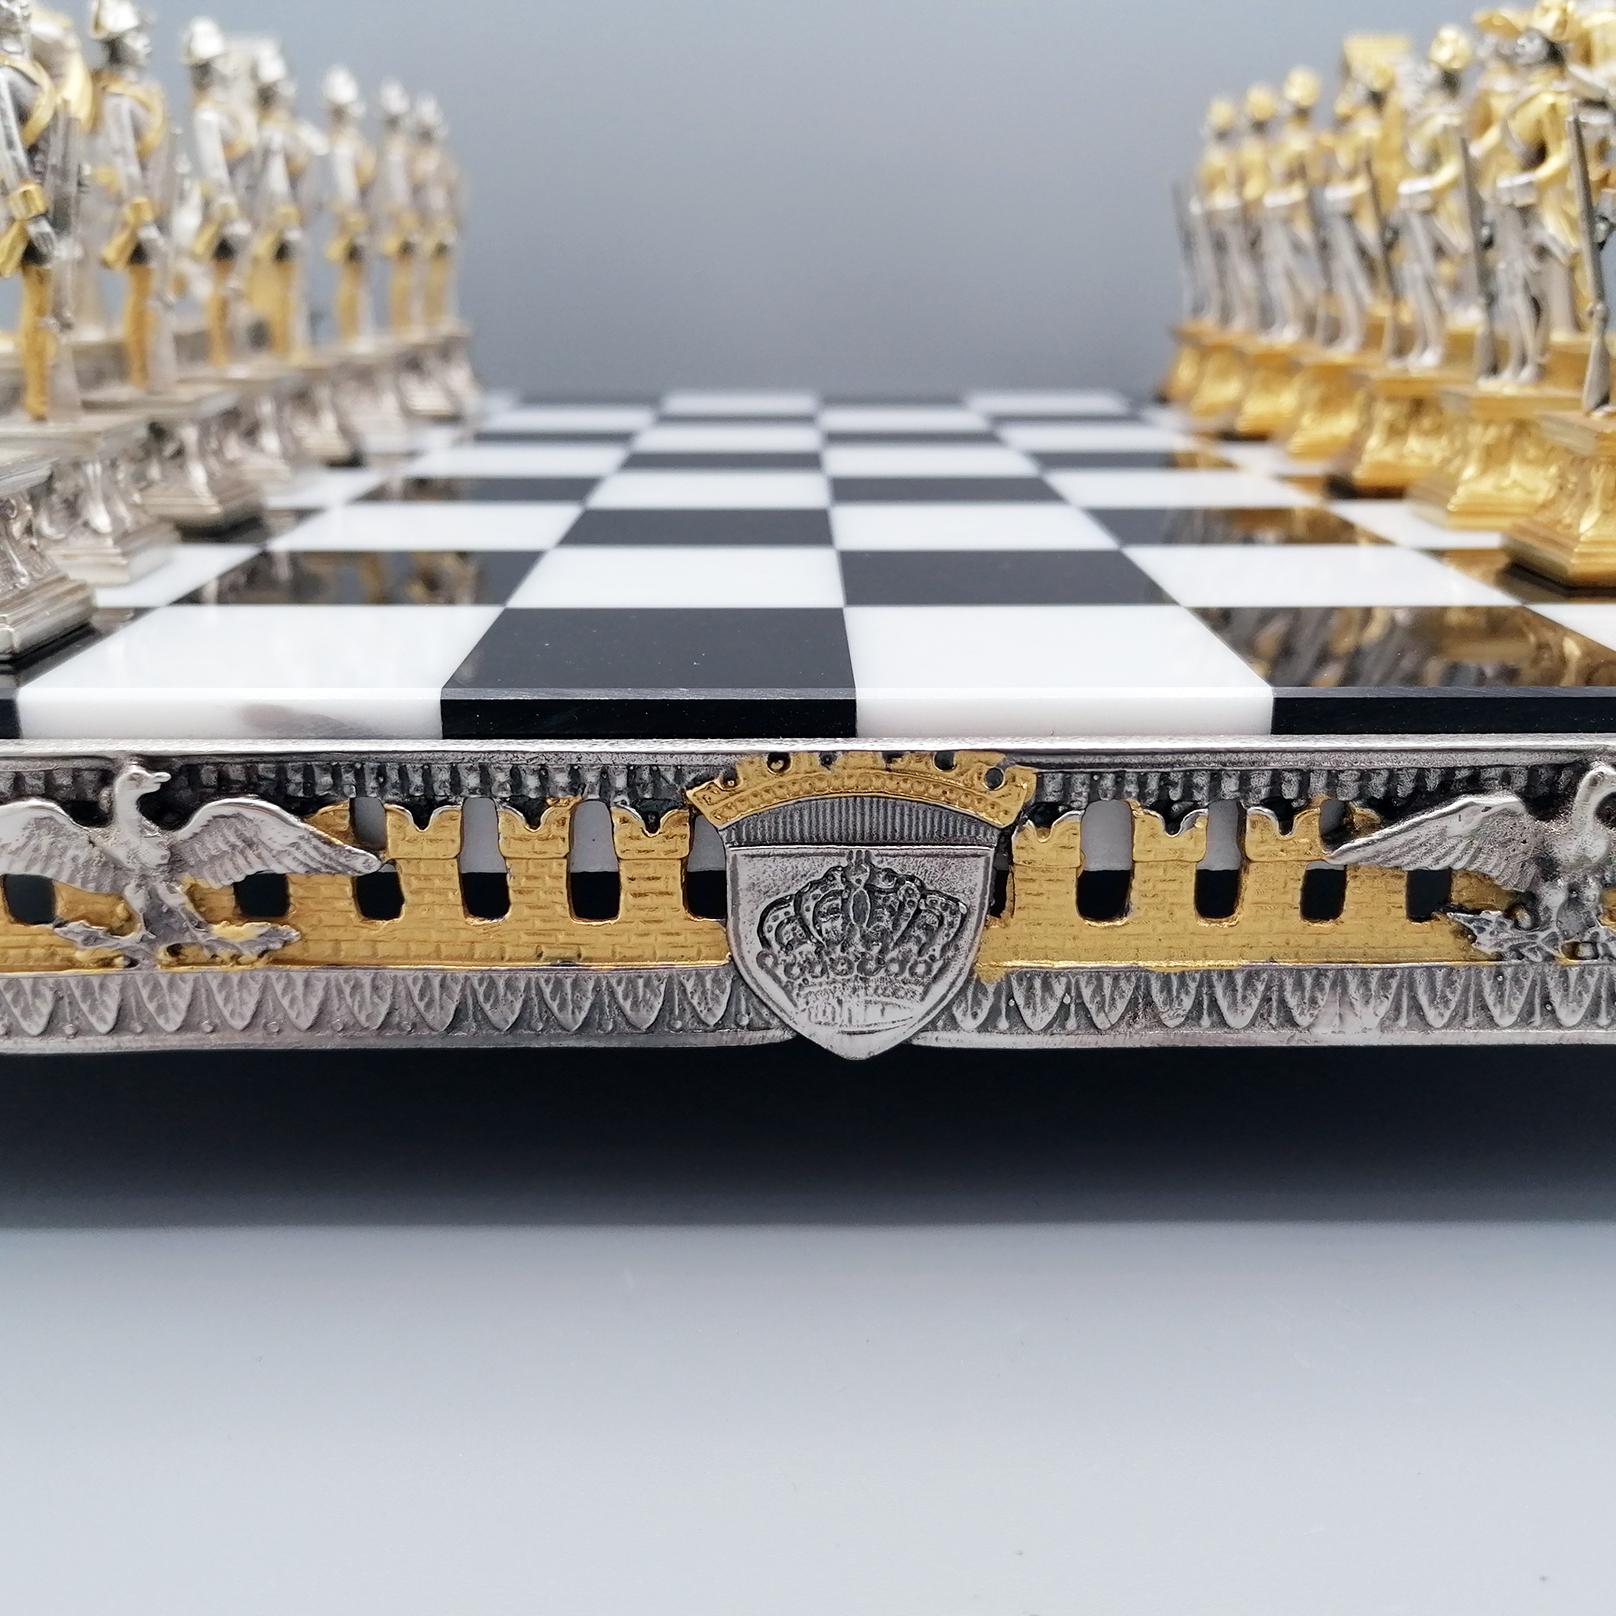 gold plated chess set